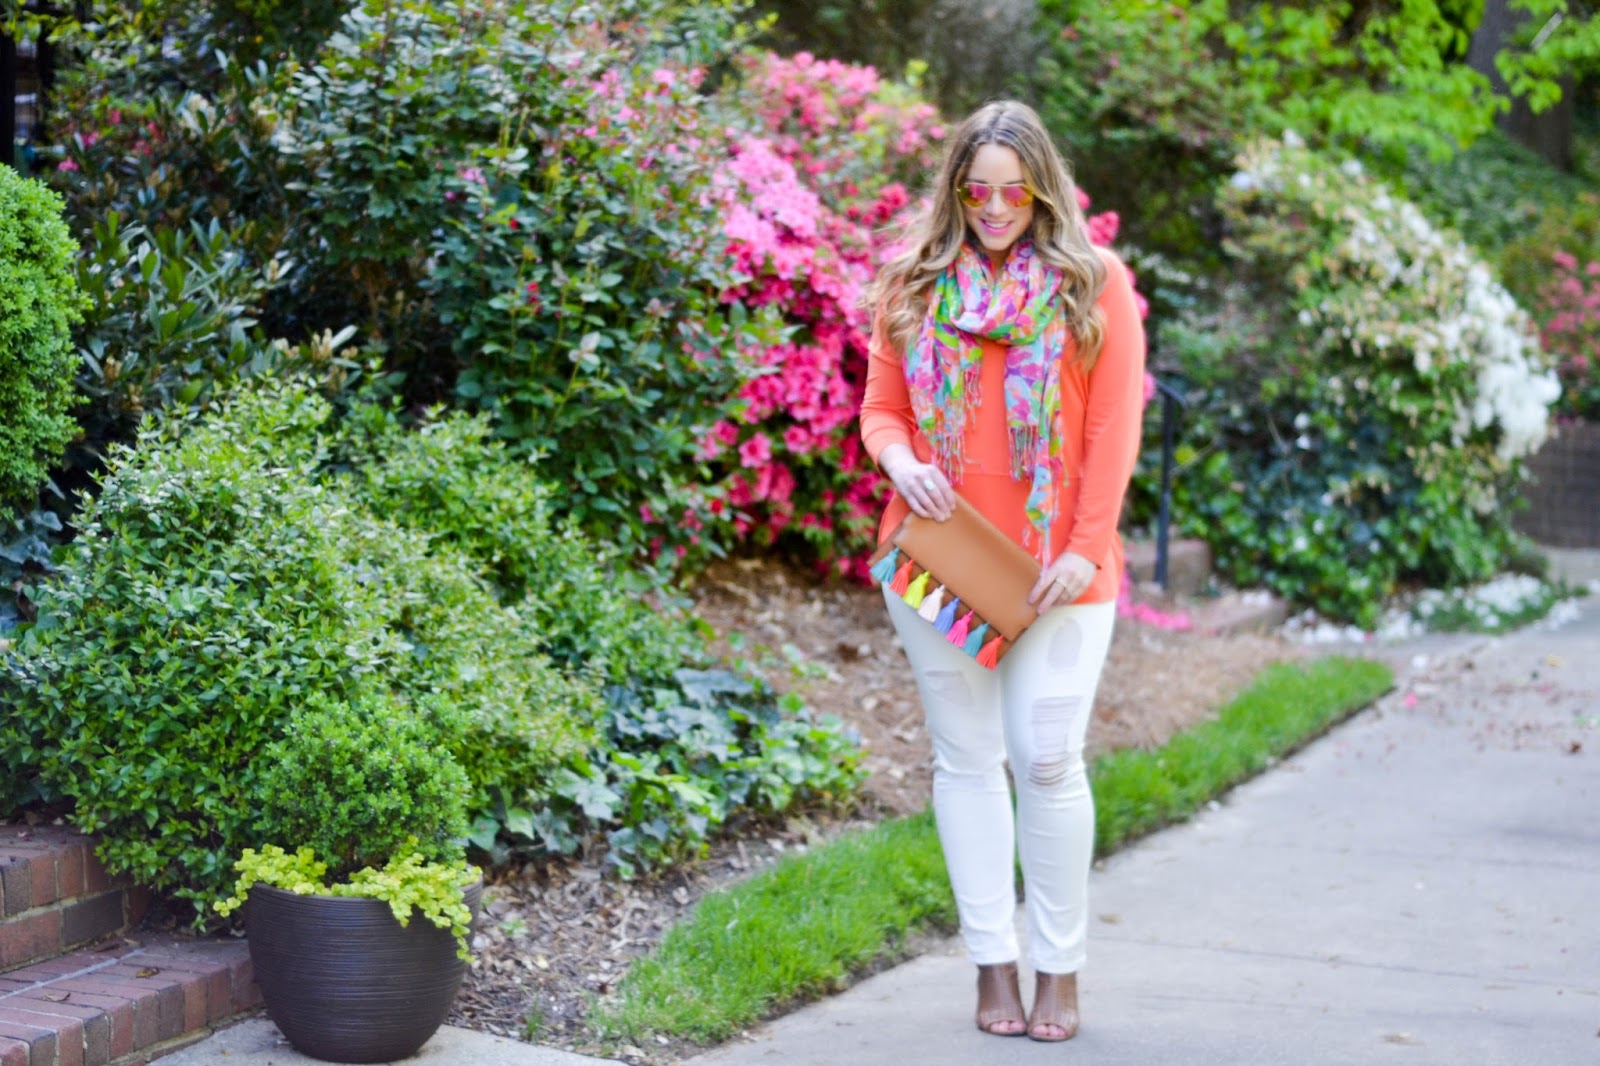 Lilly Pulitzer Scarf + Colorful Outfit